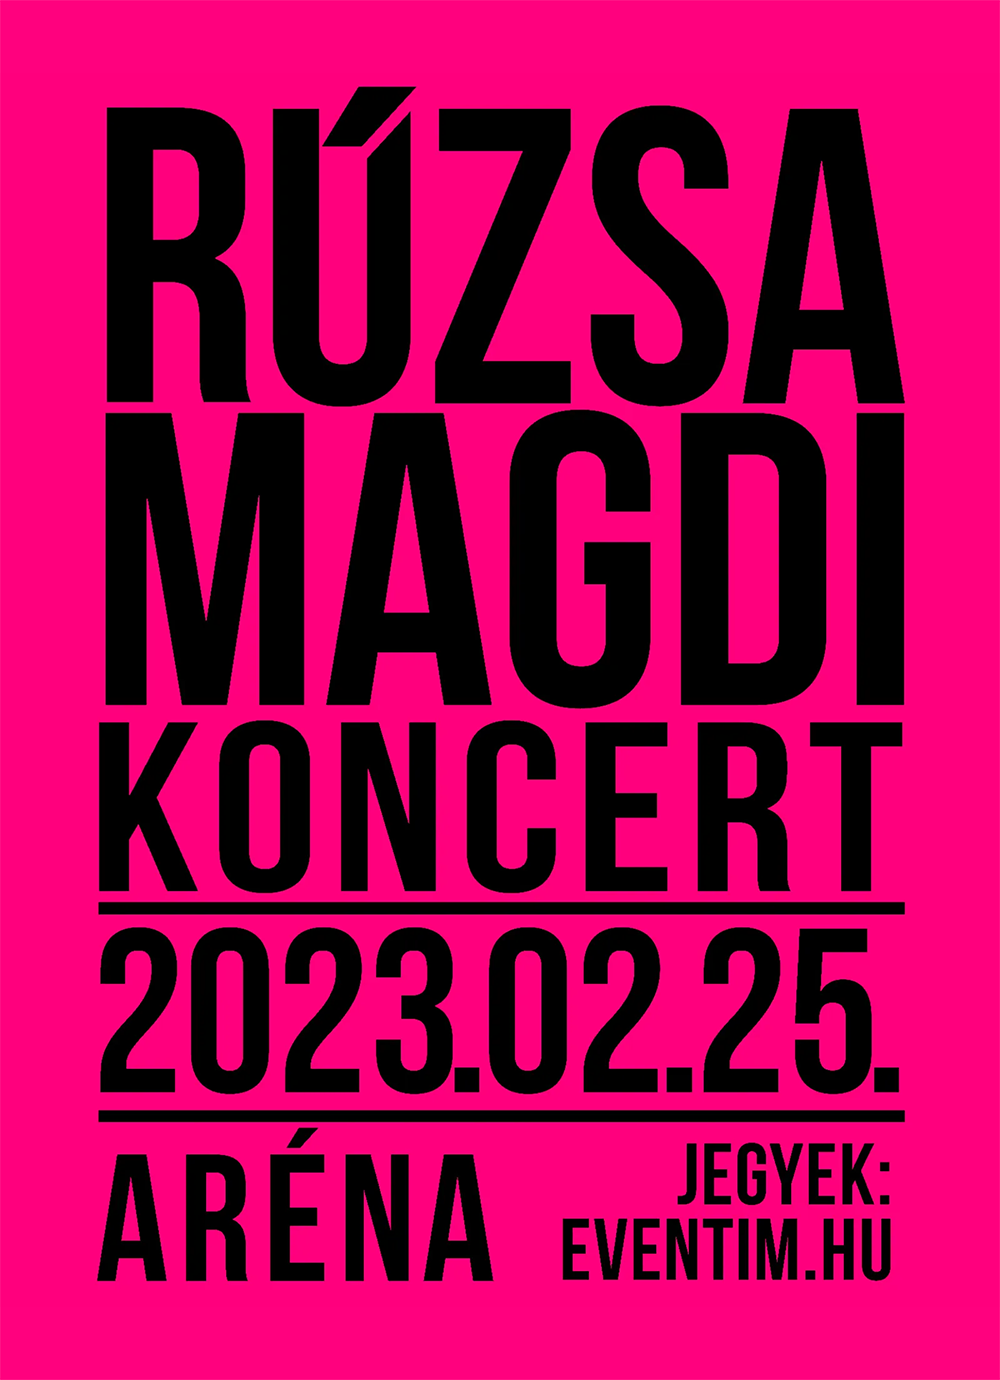 images/news/rm-arena-2023.png